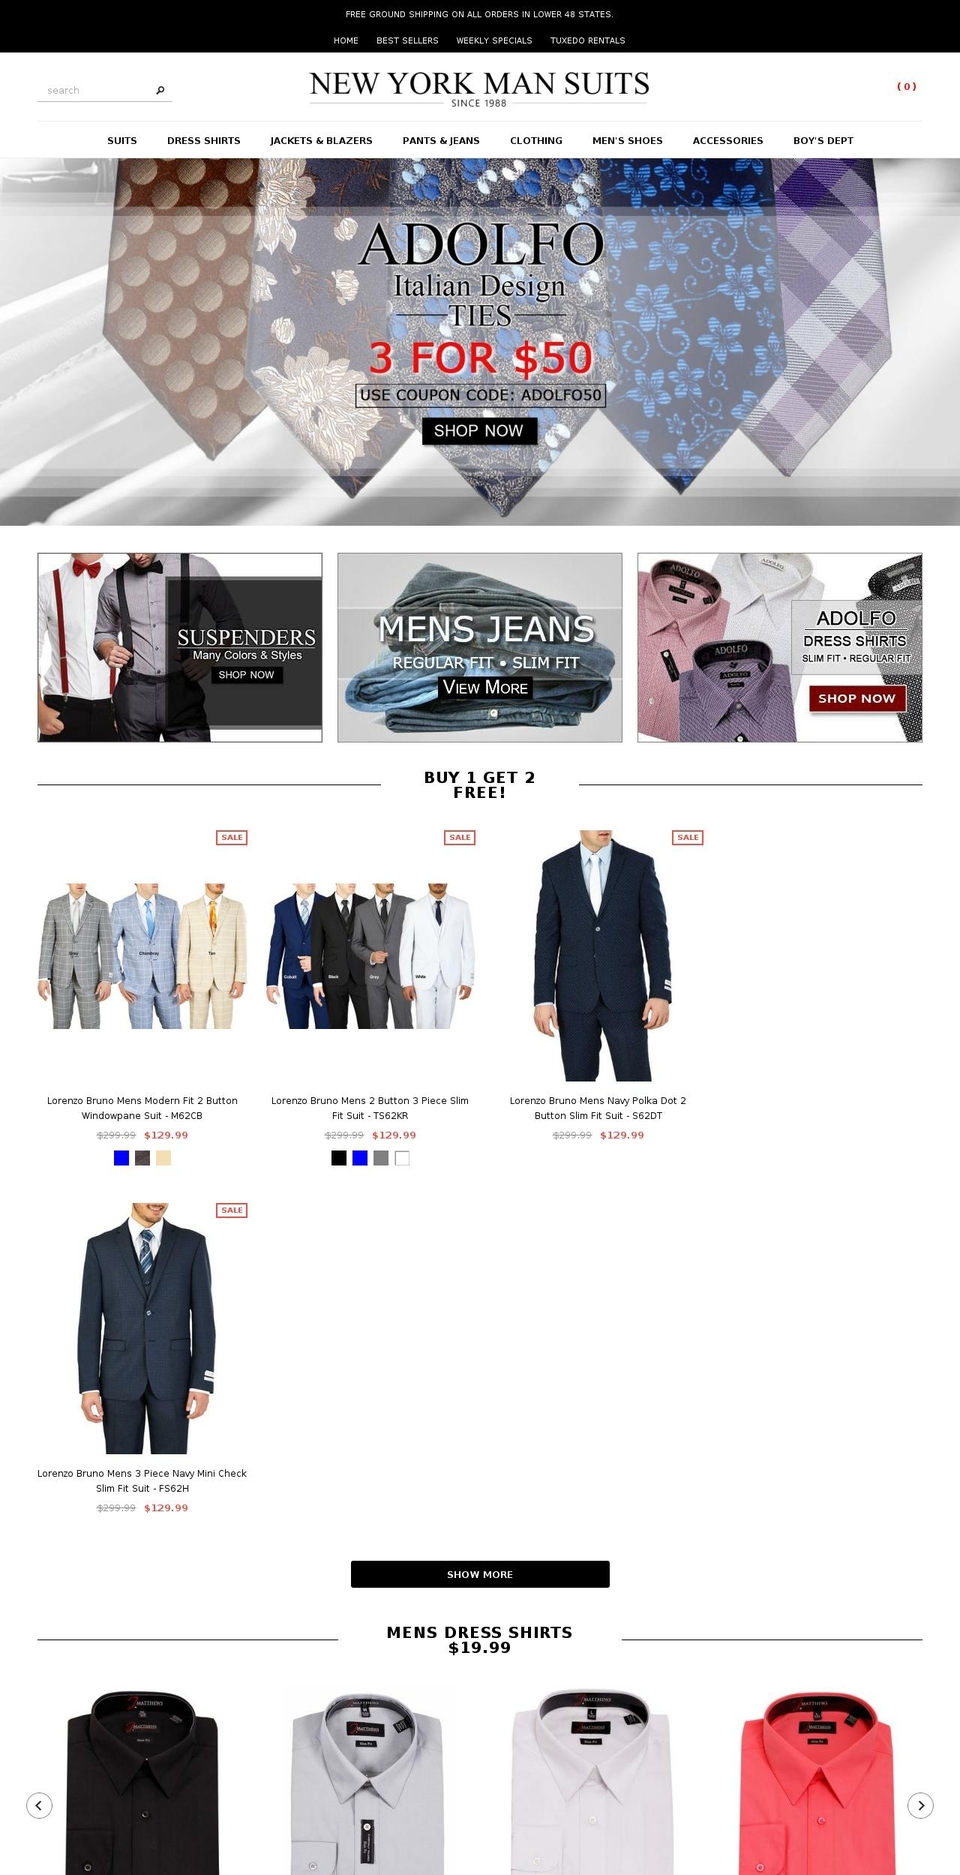 Made With ❤ By Minion Made Shopify theme site example nymsuit.com